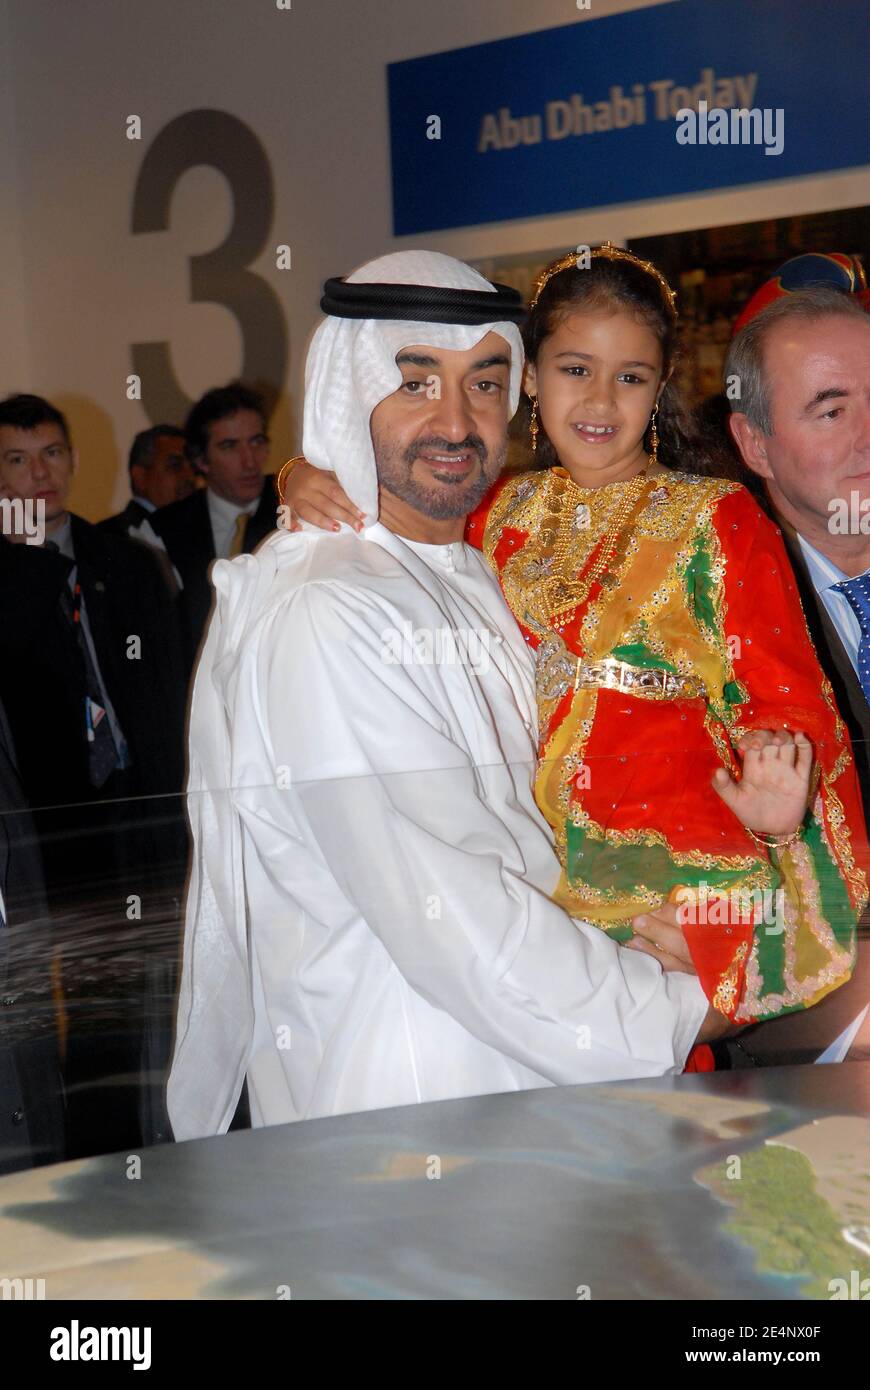 Abu Dhabi's Crown Prince Sheikh Mohammed Bin Zayed with his 6 year old  daughter Princess Hassa attend a cultural exhibition in Abu Dhabi, United  Arab Emirates on January 15, 2008. Photo by